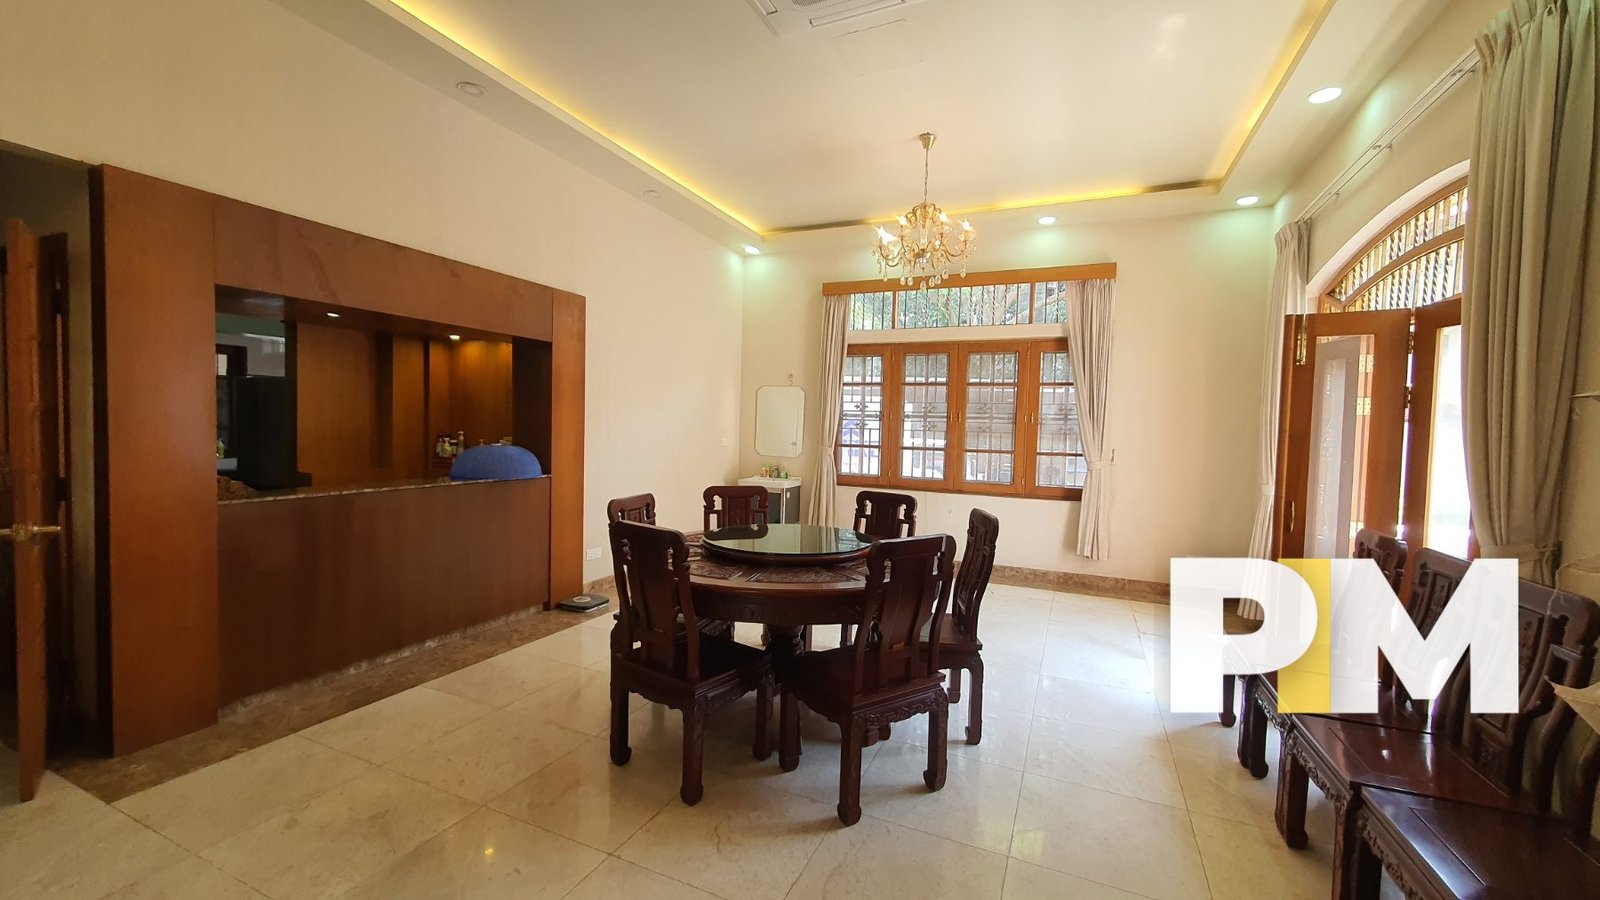 DIning room with table and chairs - Yangon Real Estate